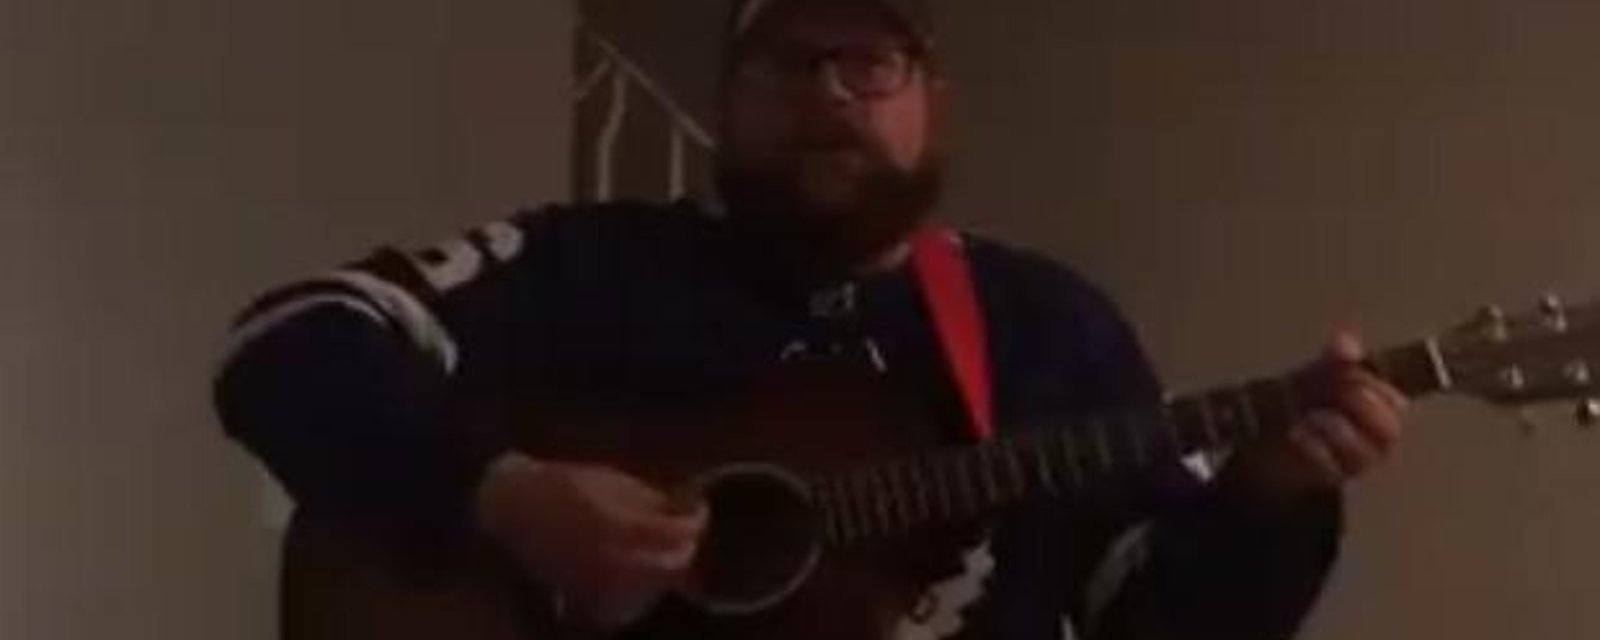 Leafs fan creates candid song about Maple Leafs choking Game 7 